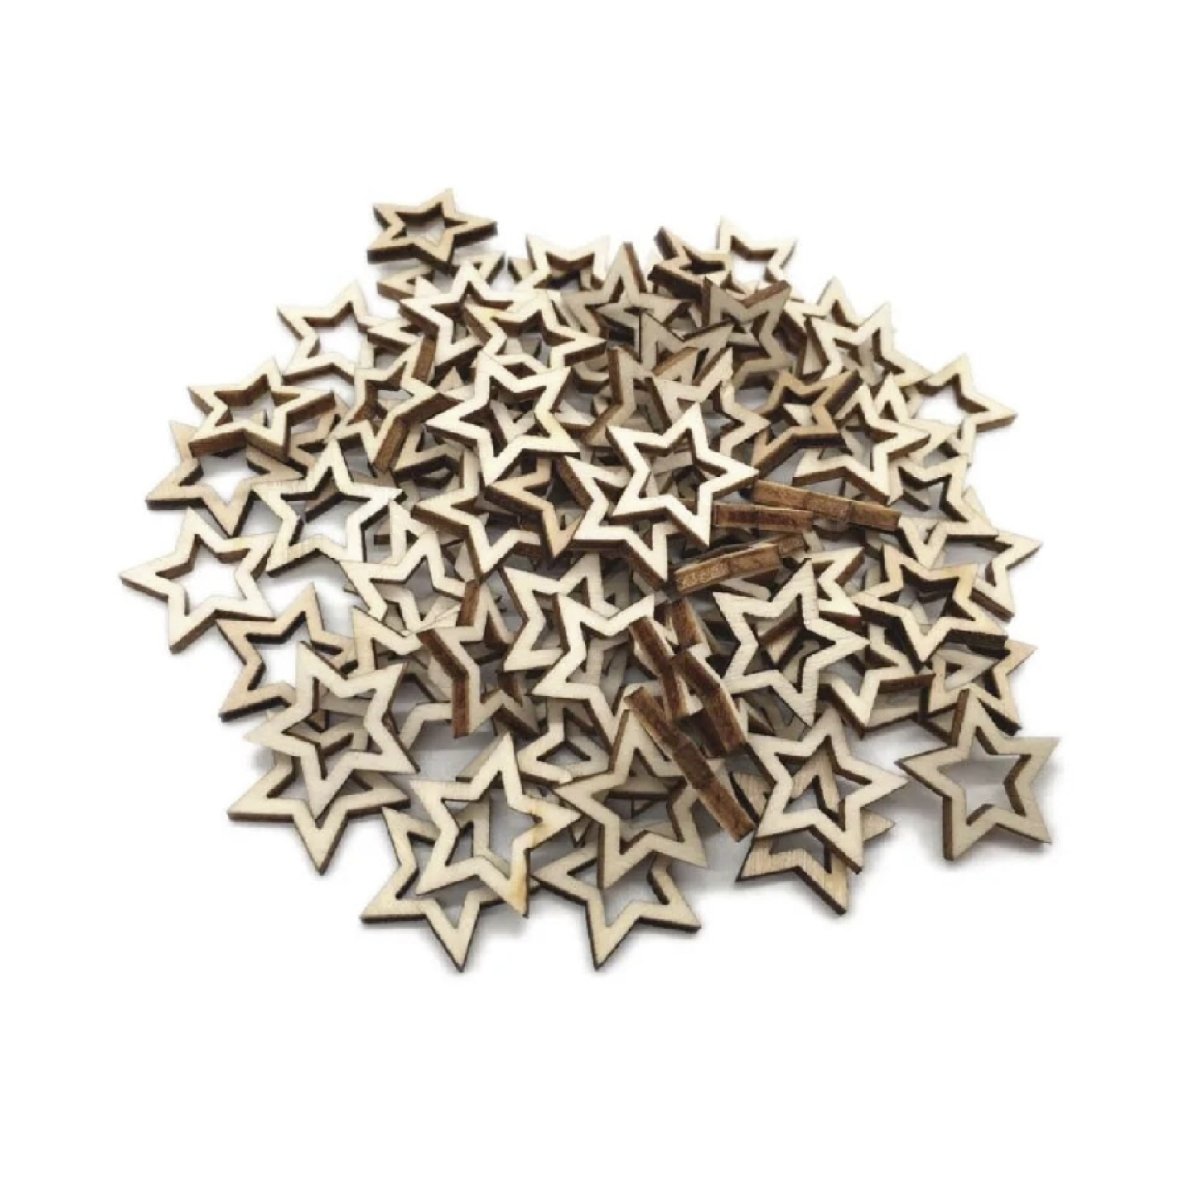 50/100pcs Wooden Stars Confetti 10-30mm Wood Crafts Decorations Centre-Removed - 50pcs 20mm - - Asia Sell